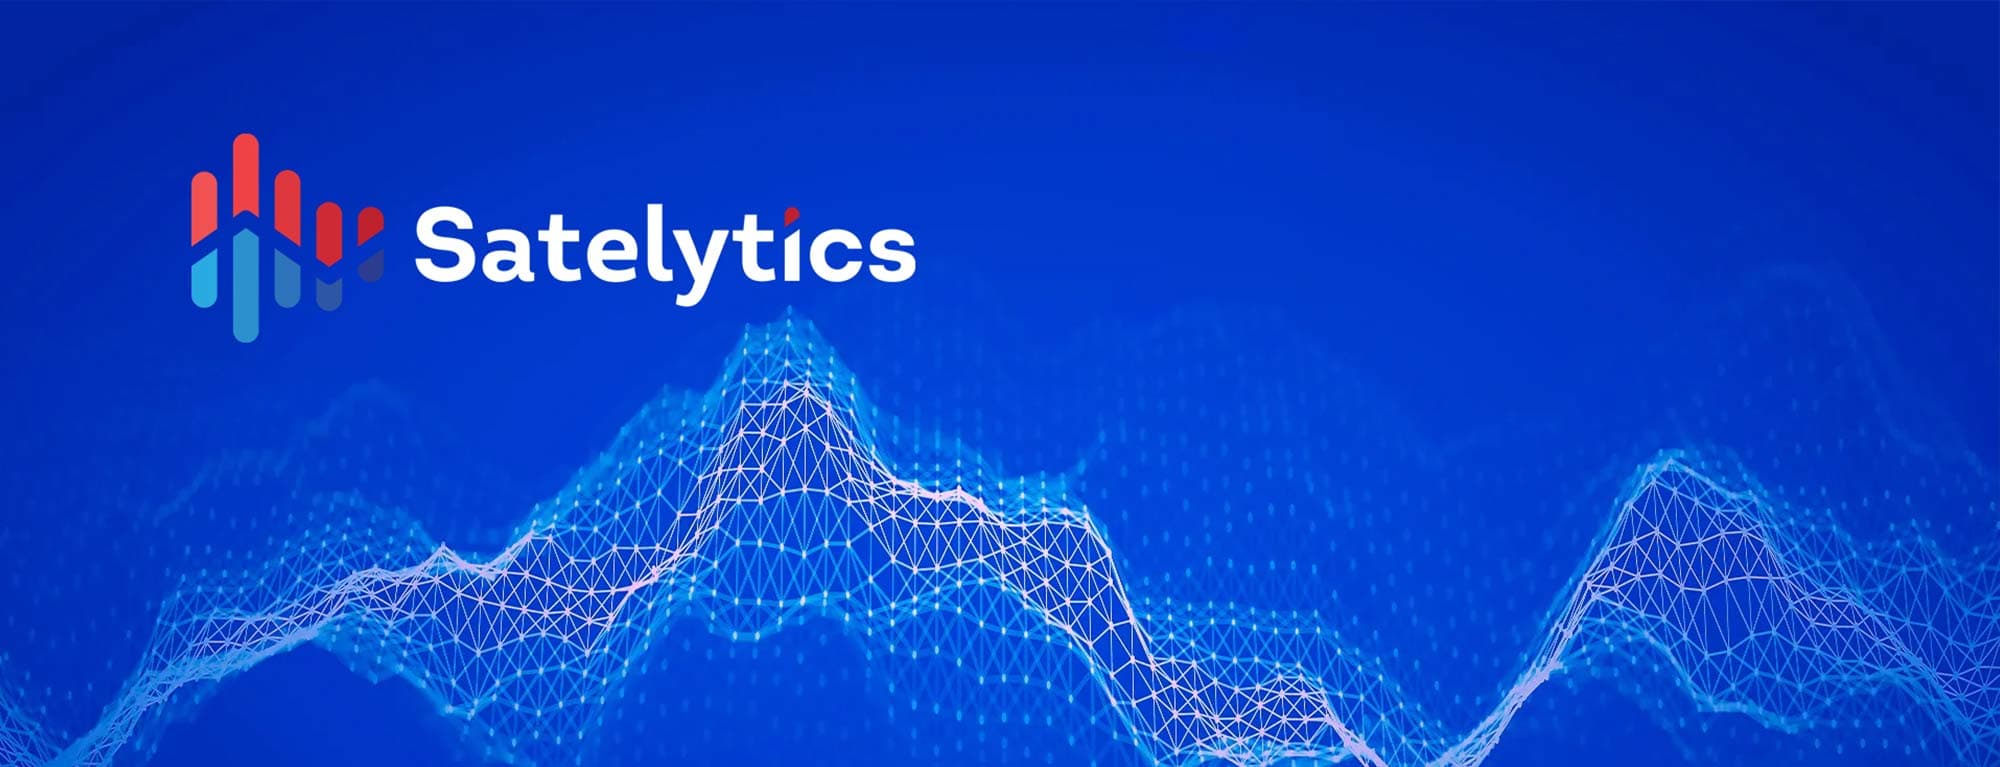 Timely Data Delivery is Key to AI Geospatial Analytics for Satelytics banner